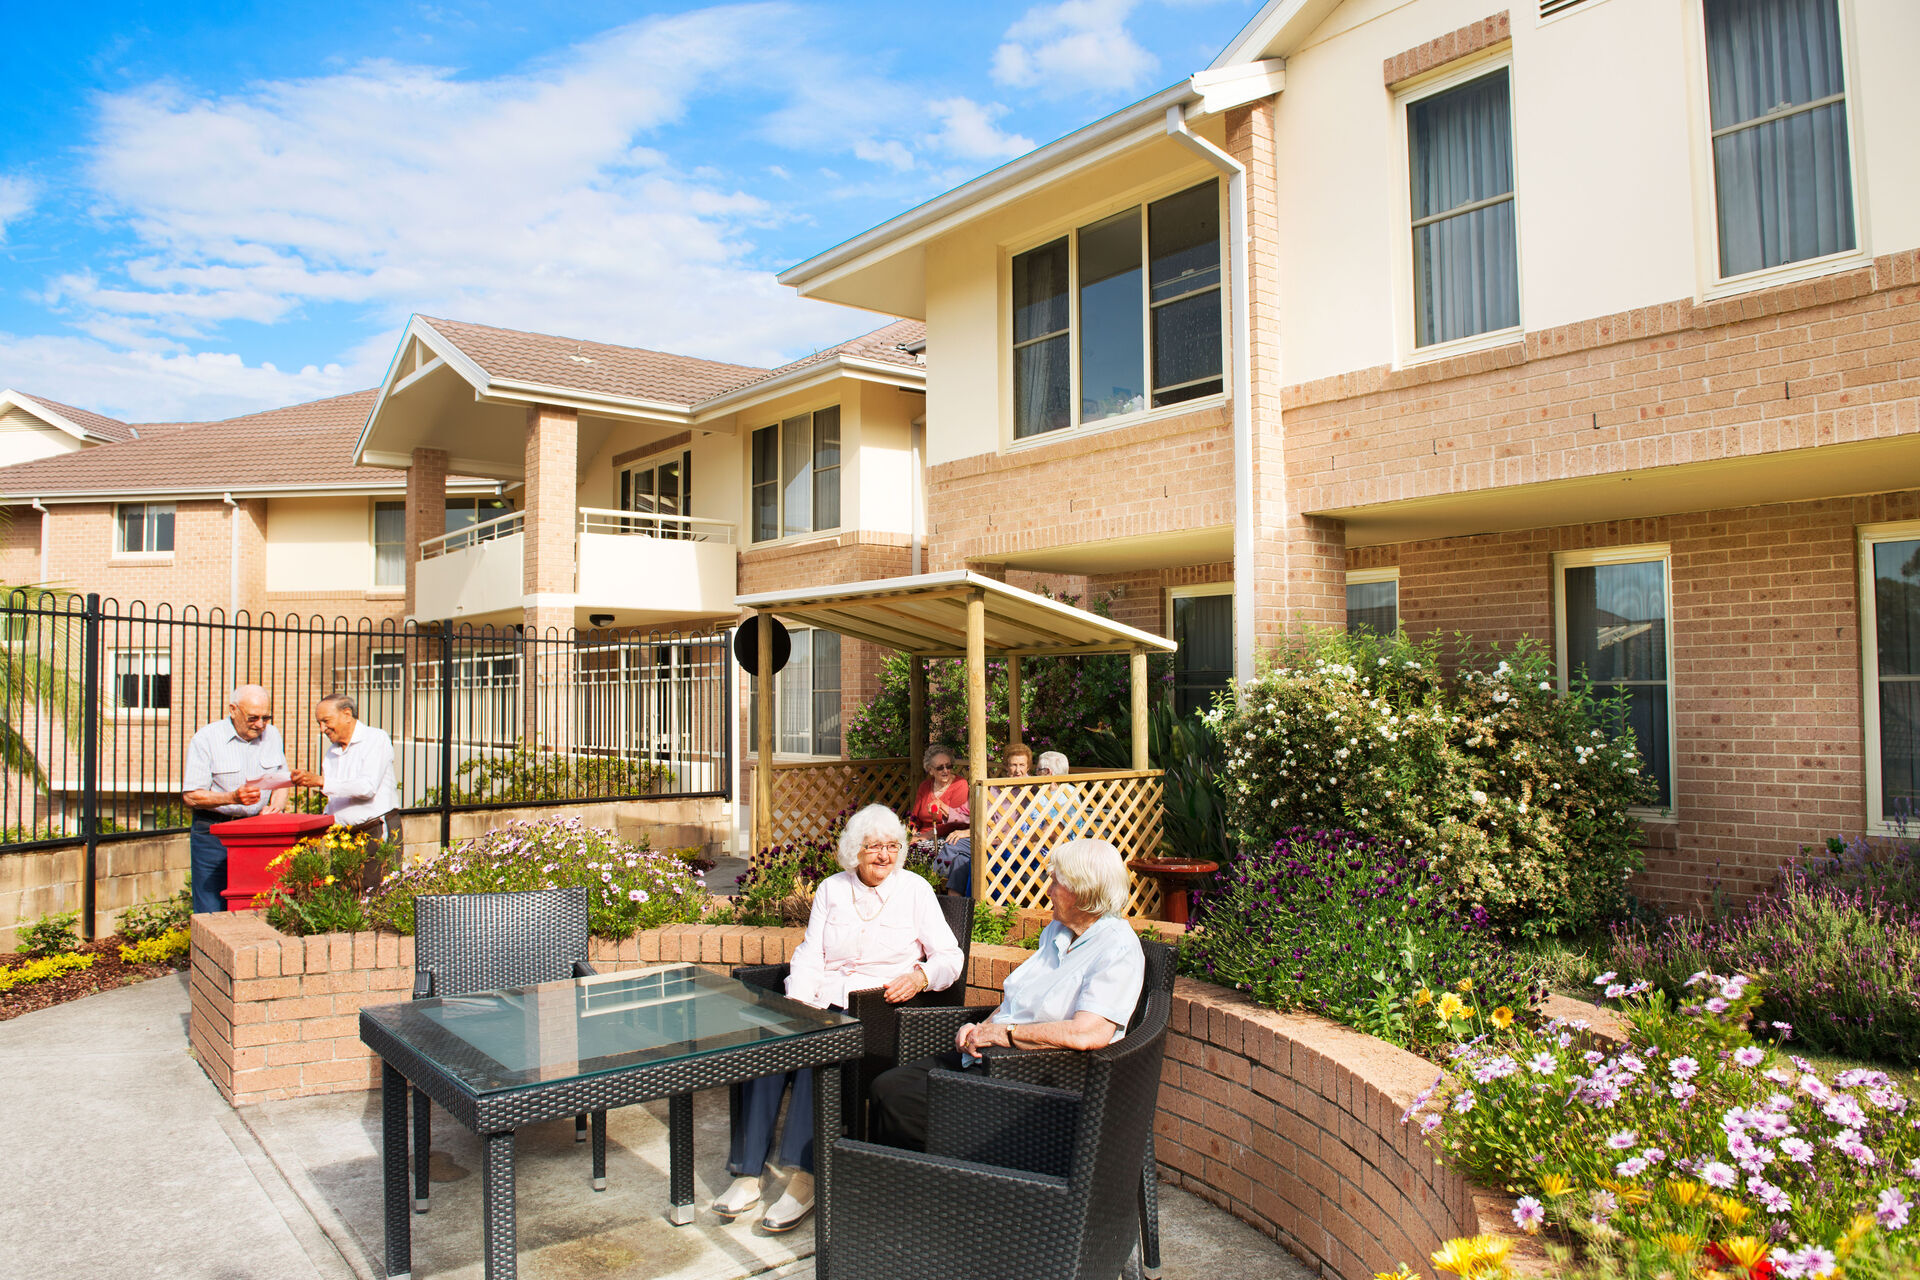 baptistcare warena centre bangor sutherland shire sydney residential aged care home gardens for aged care residents to enjoy and socialise